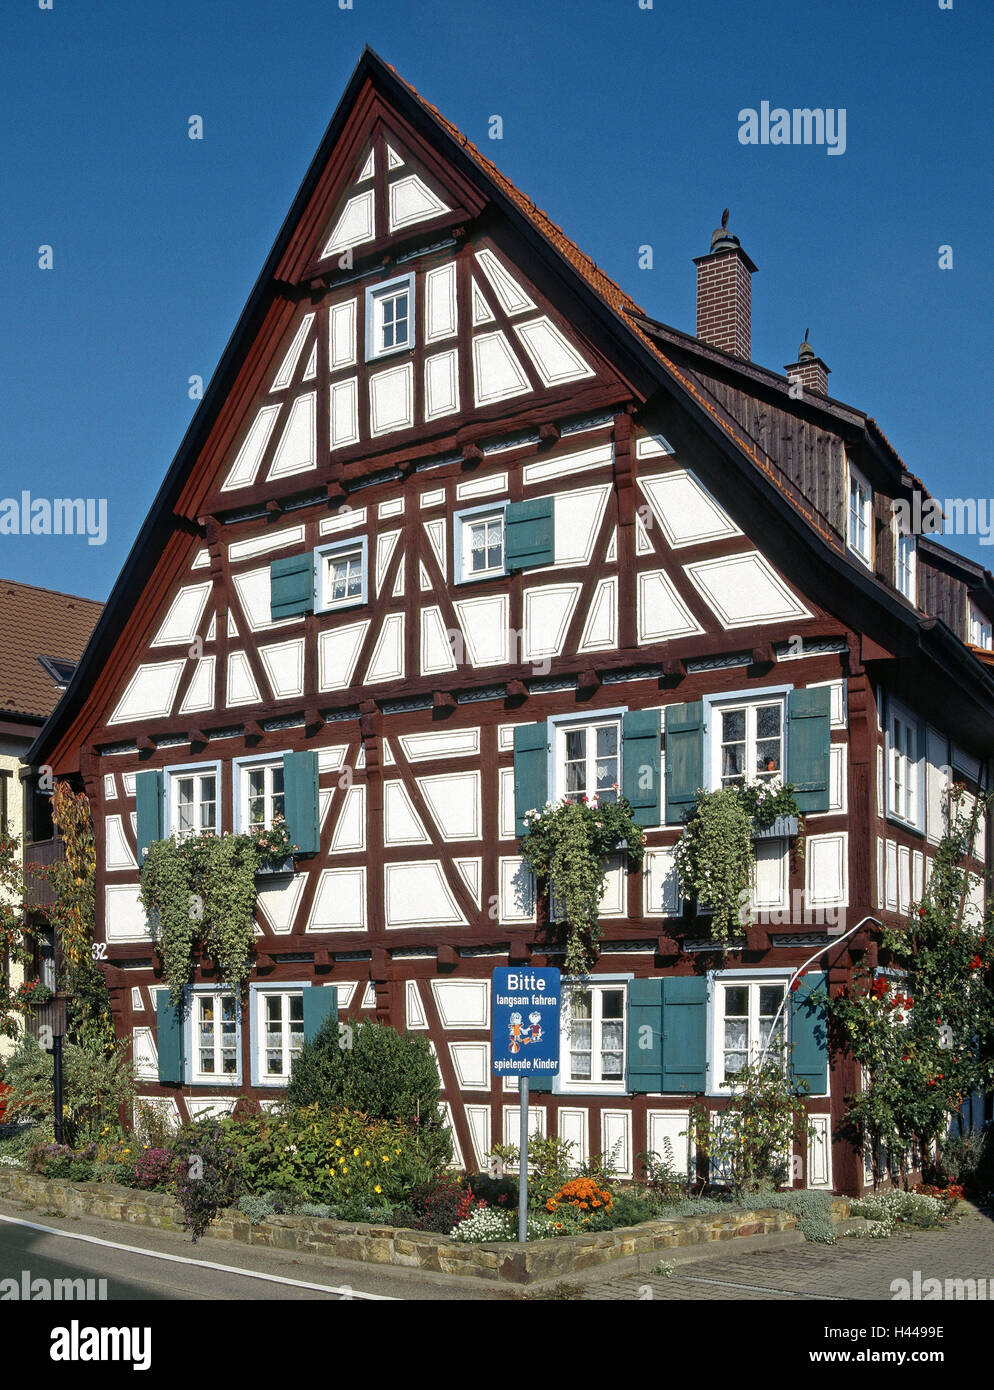 Germany, Baden-Wurttemberg, Aichwald (village), district Aichelberg (disrict), half-timbered house, outside, Aichelberg (disrict), place, building, house, outside, architectural style, half-timbered, half-timbered gable, gable, Poststrasse, garden, flower Stock Photo